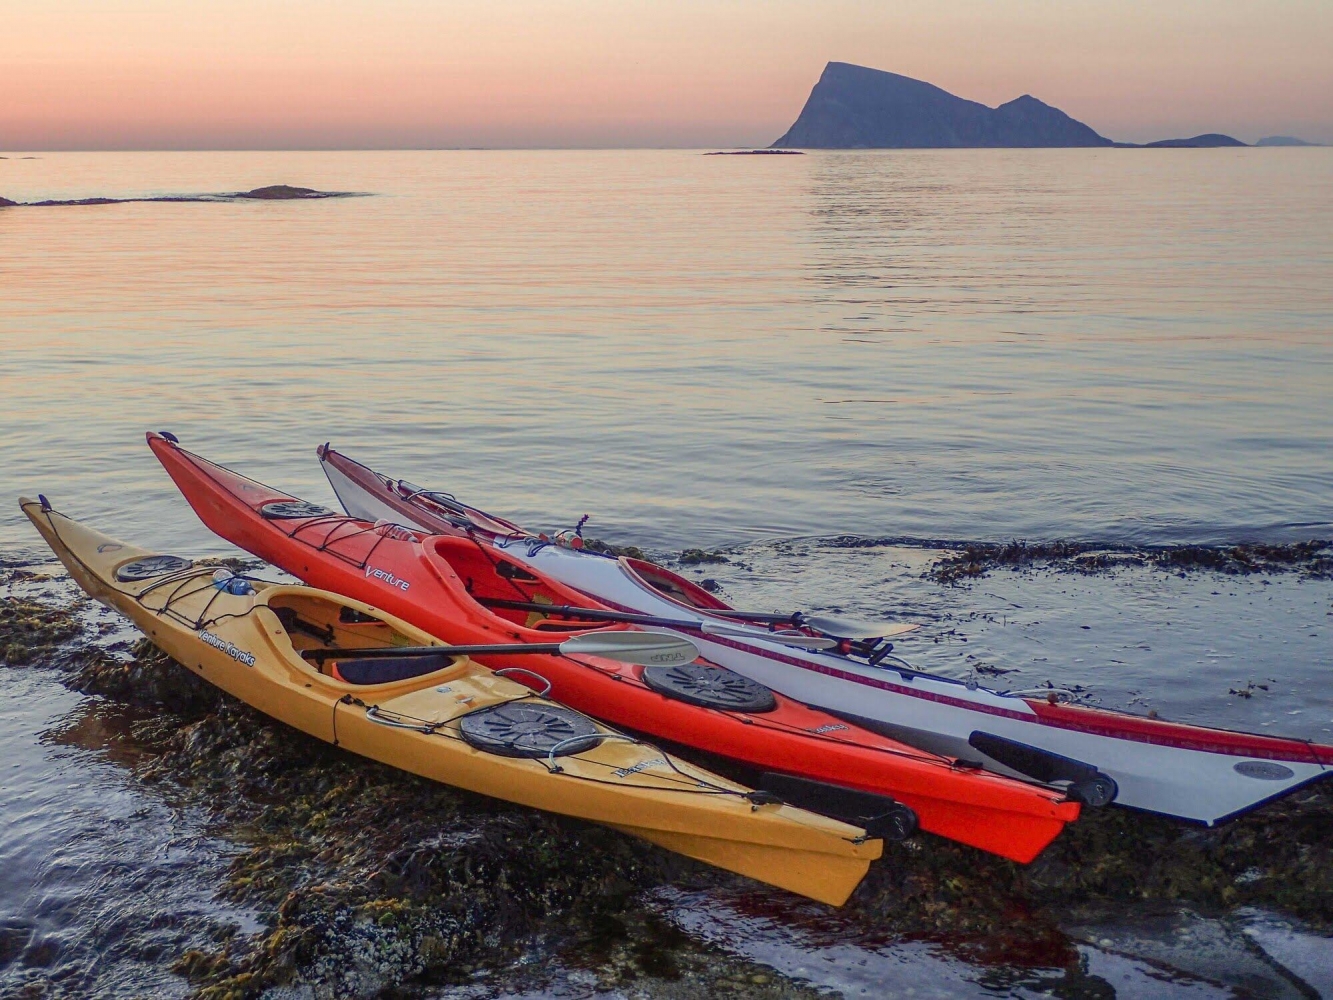 kayak on a beach with views towards the open sea and the mountain Håja